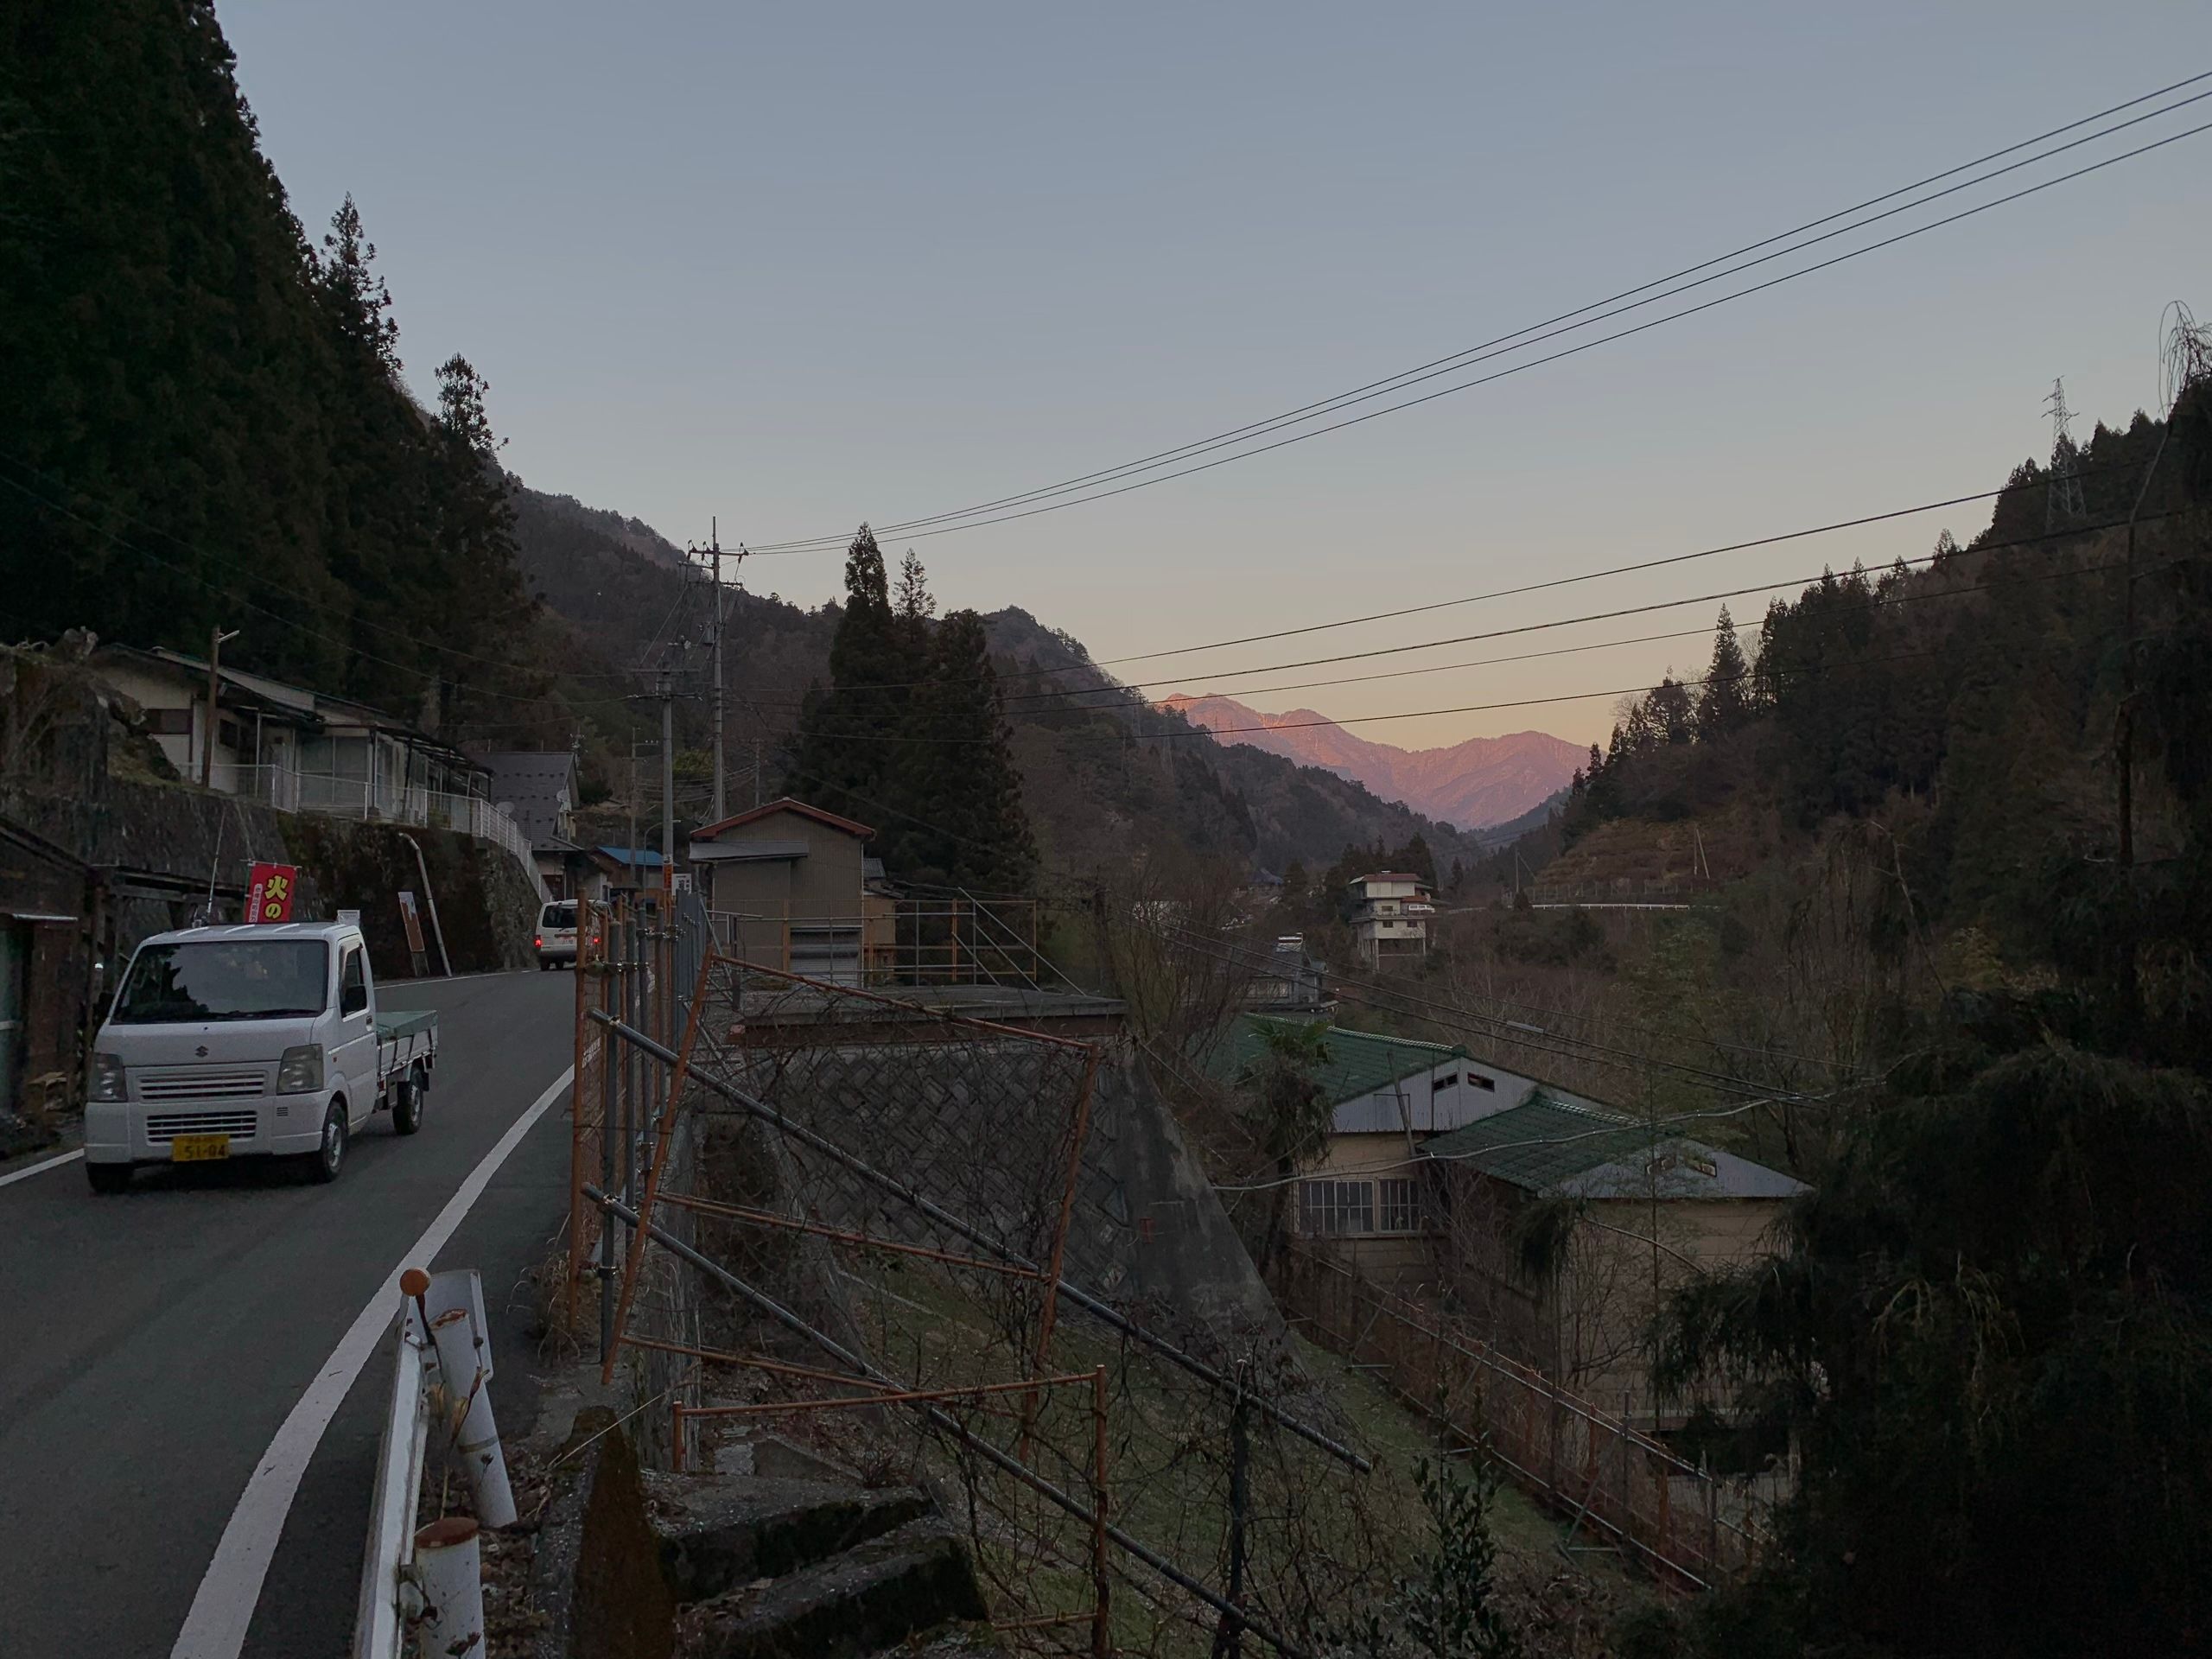 A very small van drives down a very narrow country road in a valley, with mountains on the horizon lit with alpenglow.